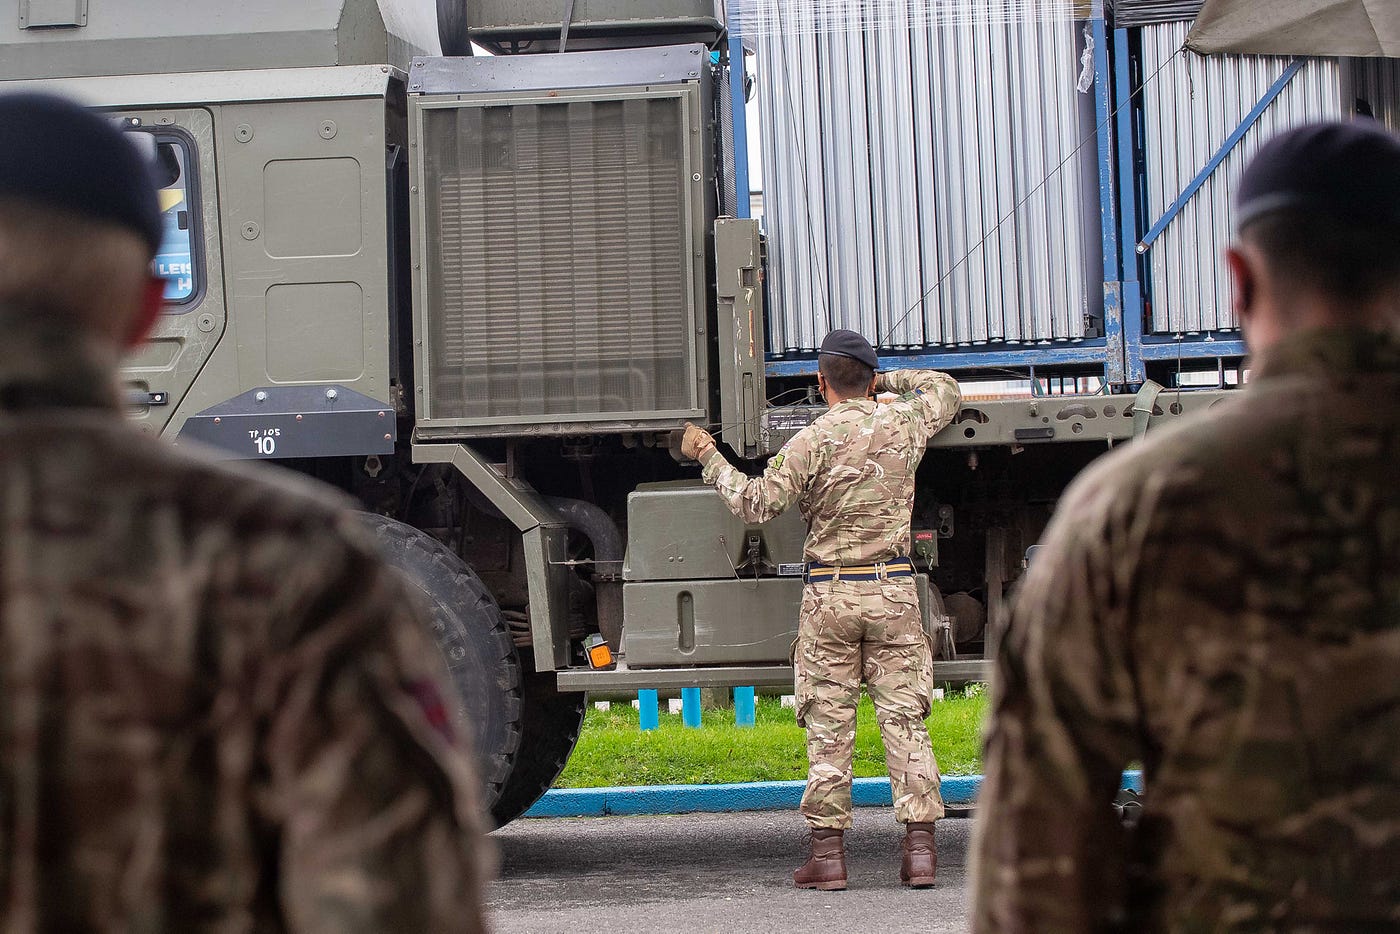 A soldier ubloads dividing screens from a lorry as colleagues stand ready to help